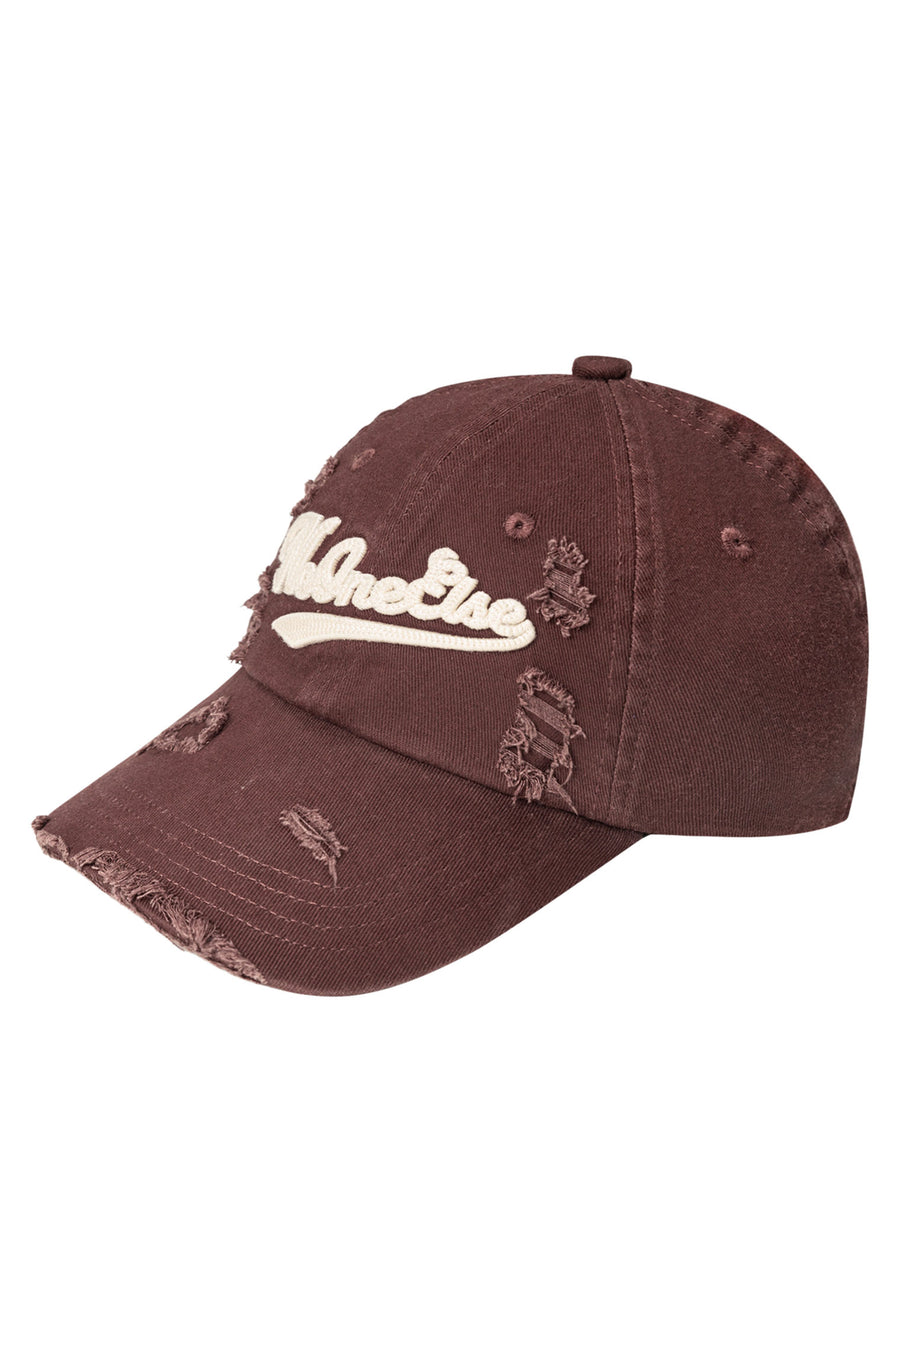 Distressed Lettering Ball Cap